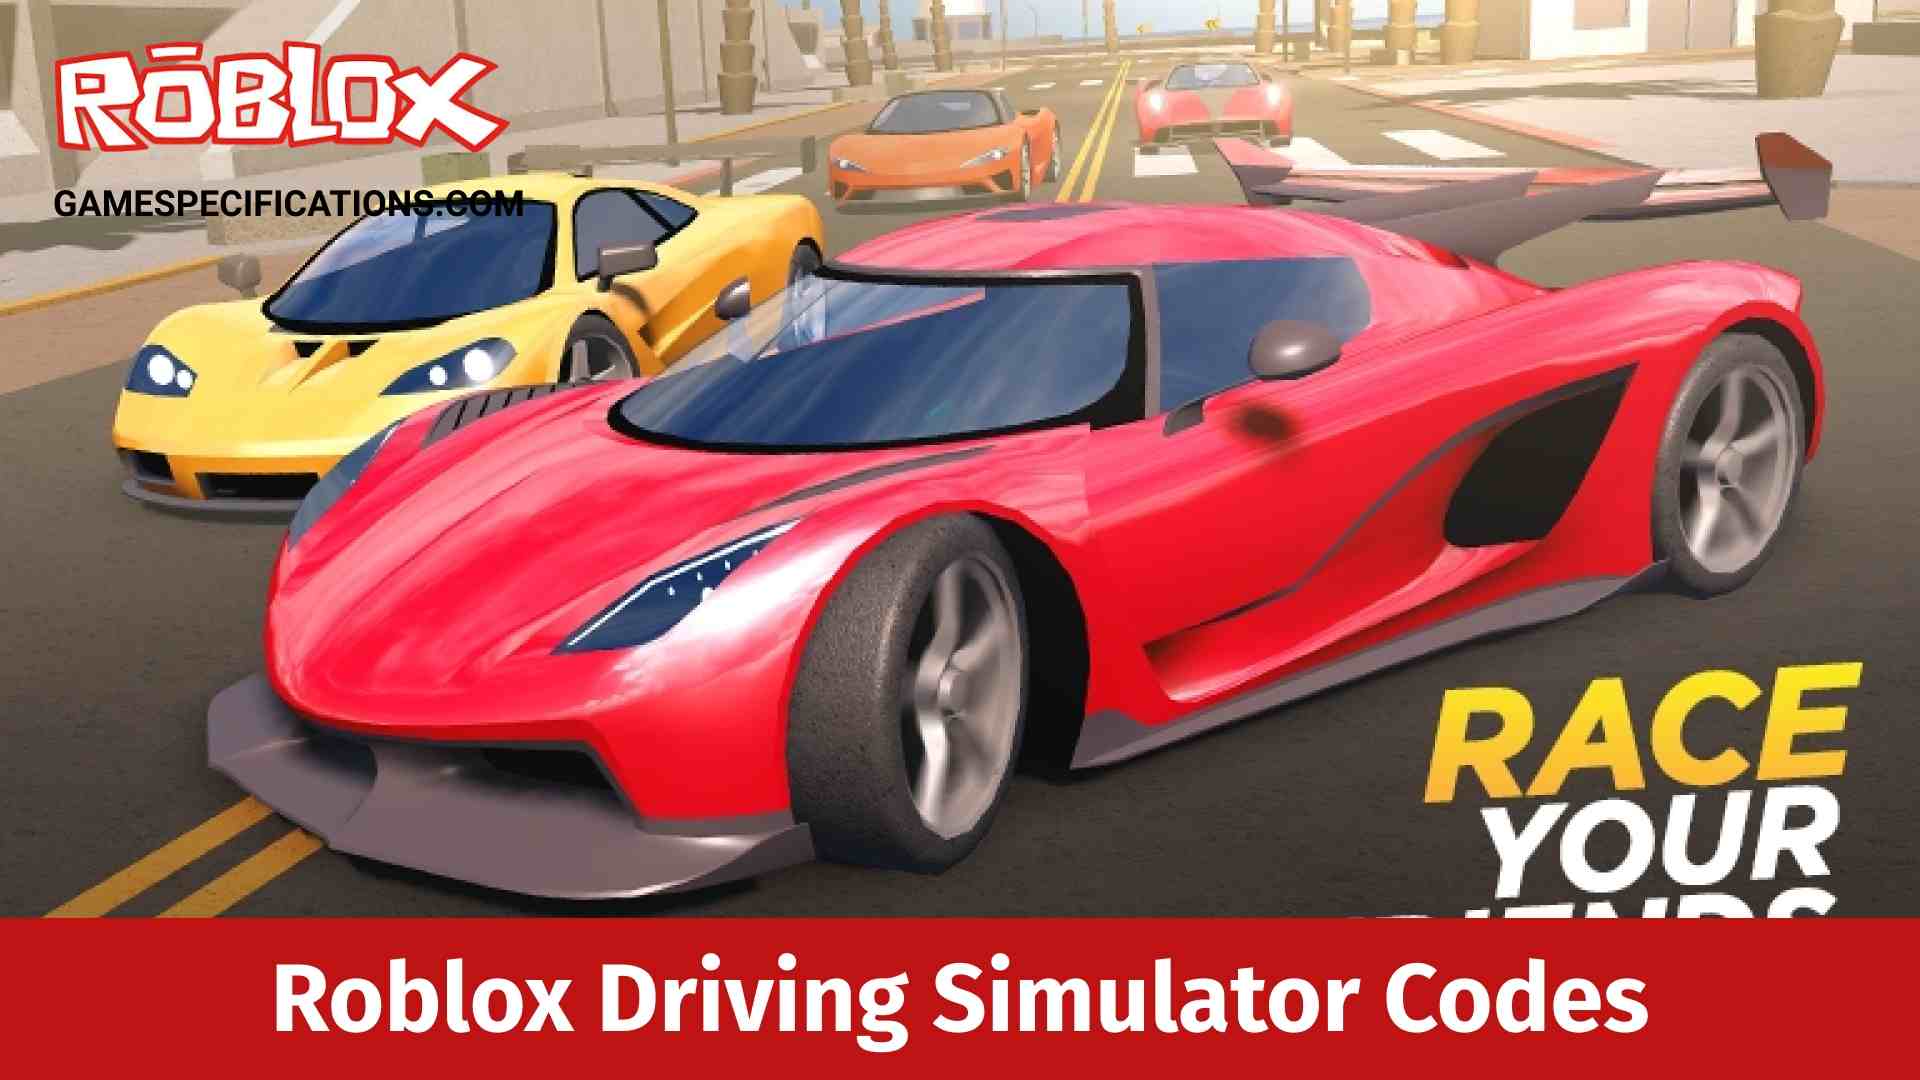 Roblox Driving Simulator Codes July 2021 Game Specifications - roblox new racing game